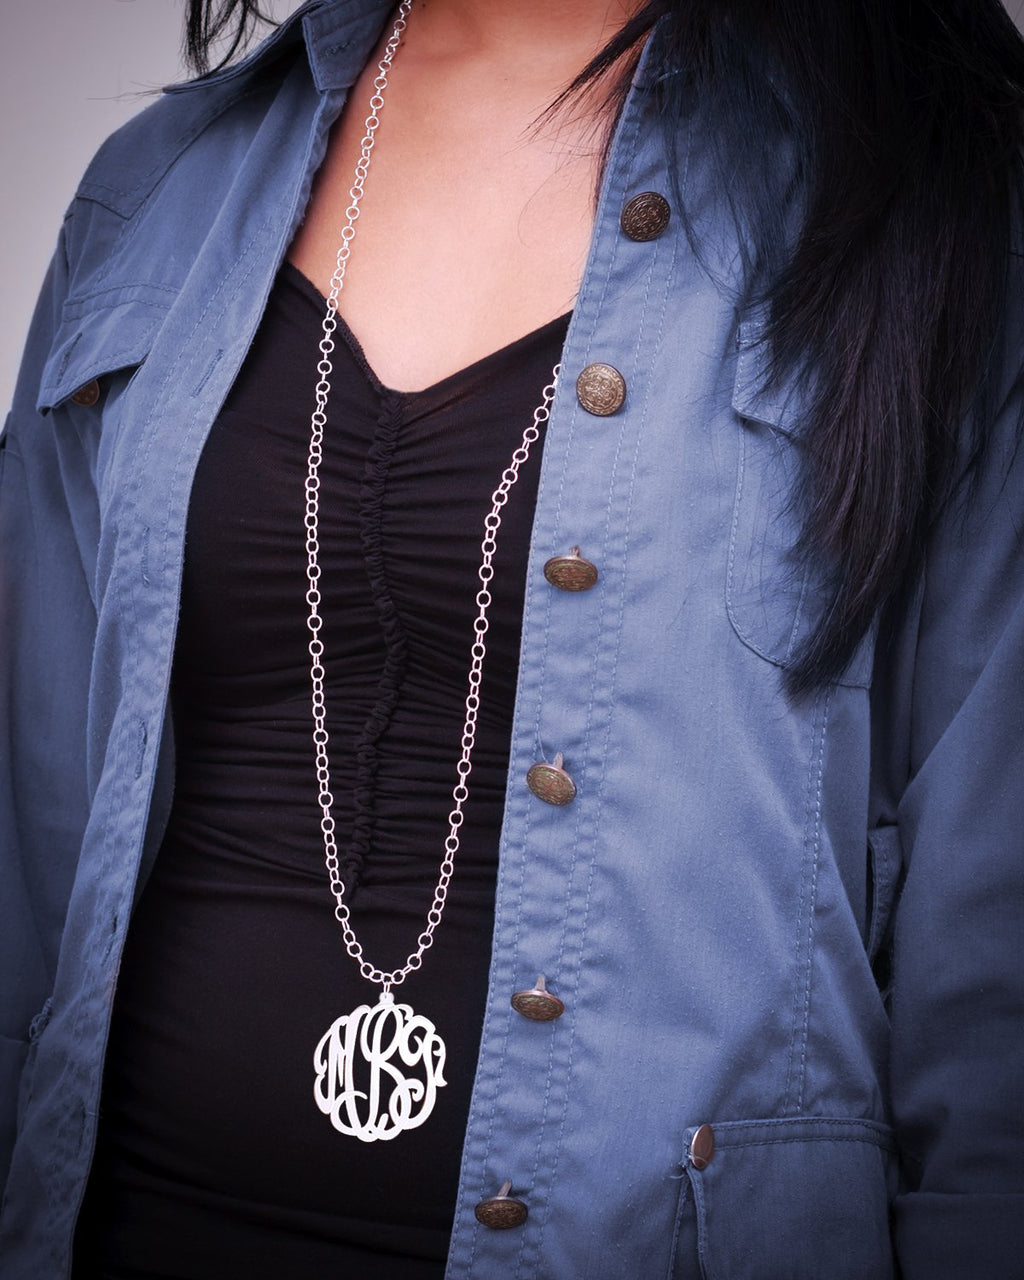 2" Monogram Necklace with 36" Link Chain